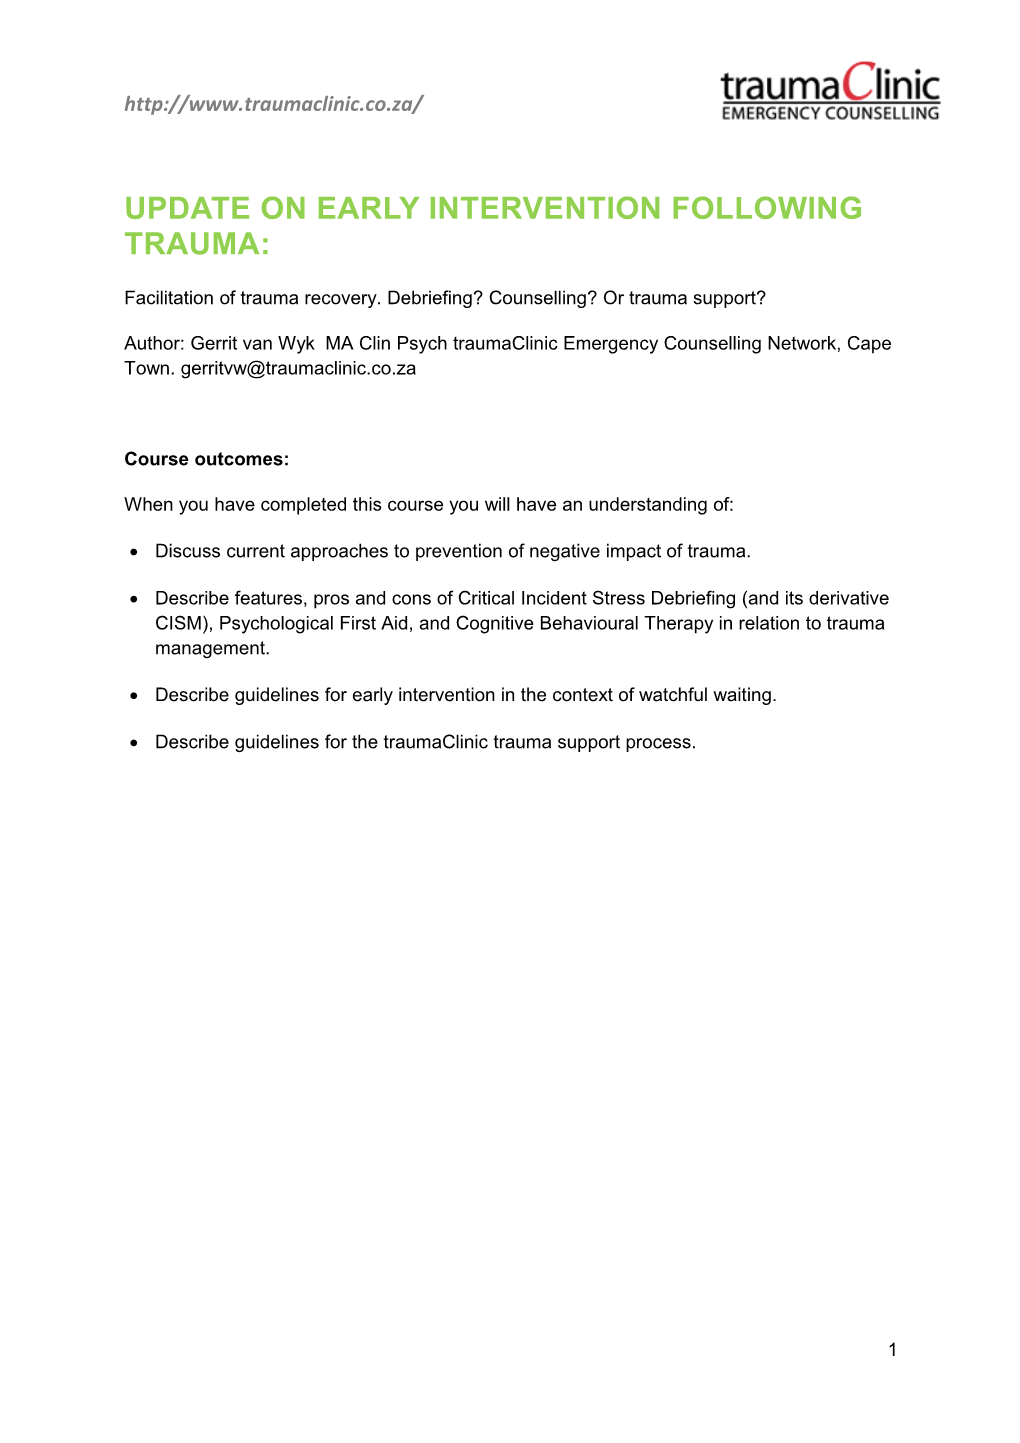 Update on Early Intervention Following Trauma